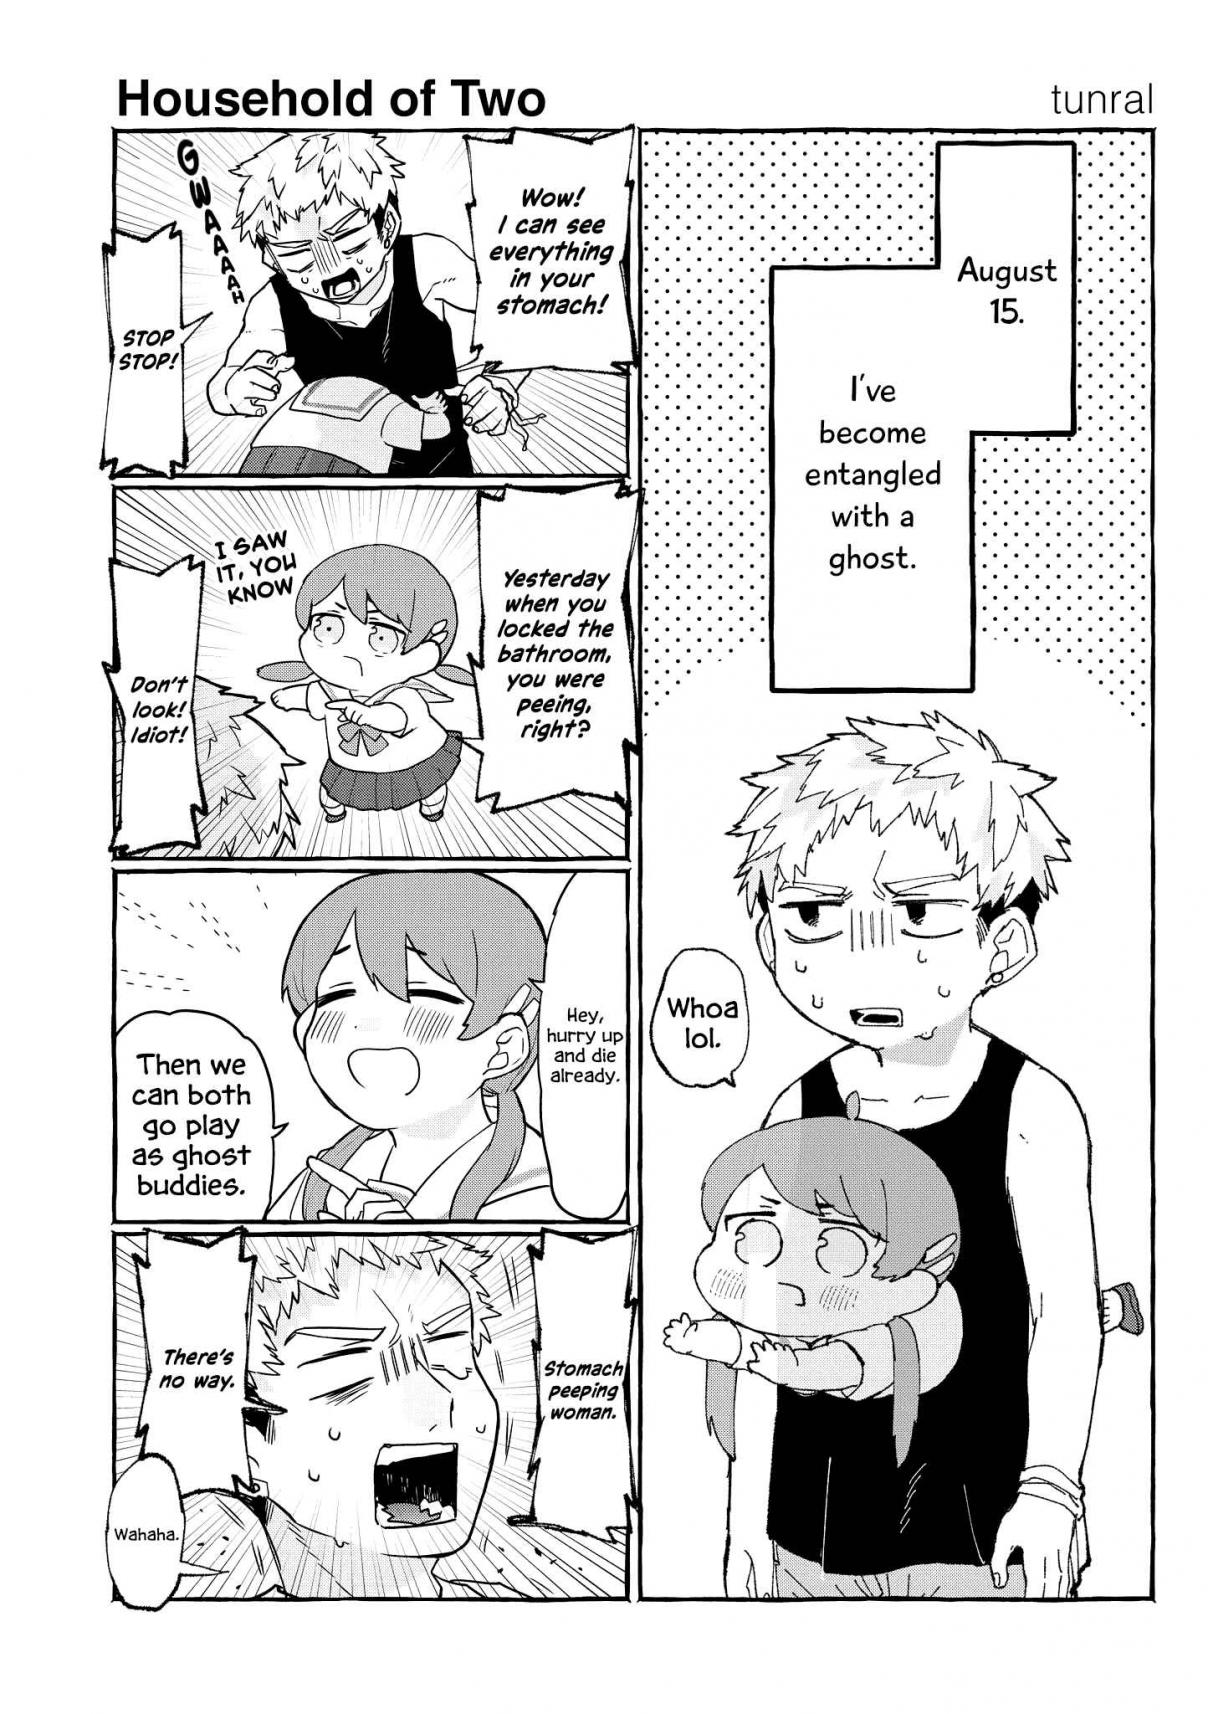 “It’s Too Precious and Hard to Read!!” 4P Short Stories Vol. 1 Ch. 11 Household of Two [By tunral]